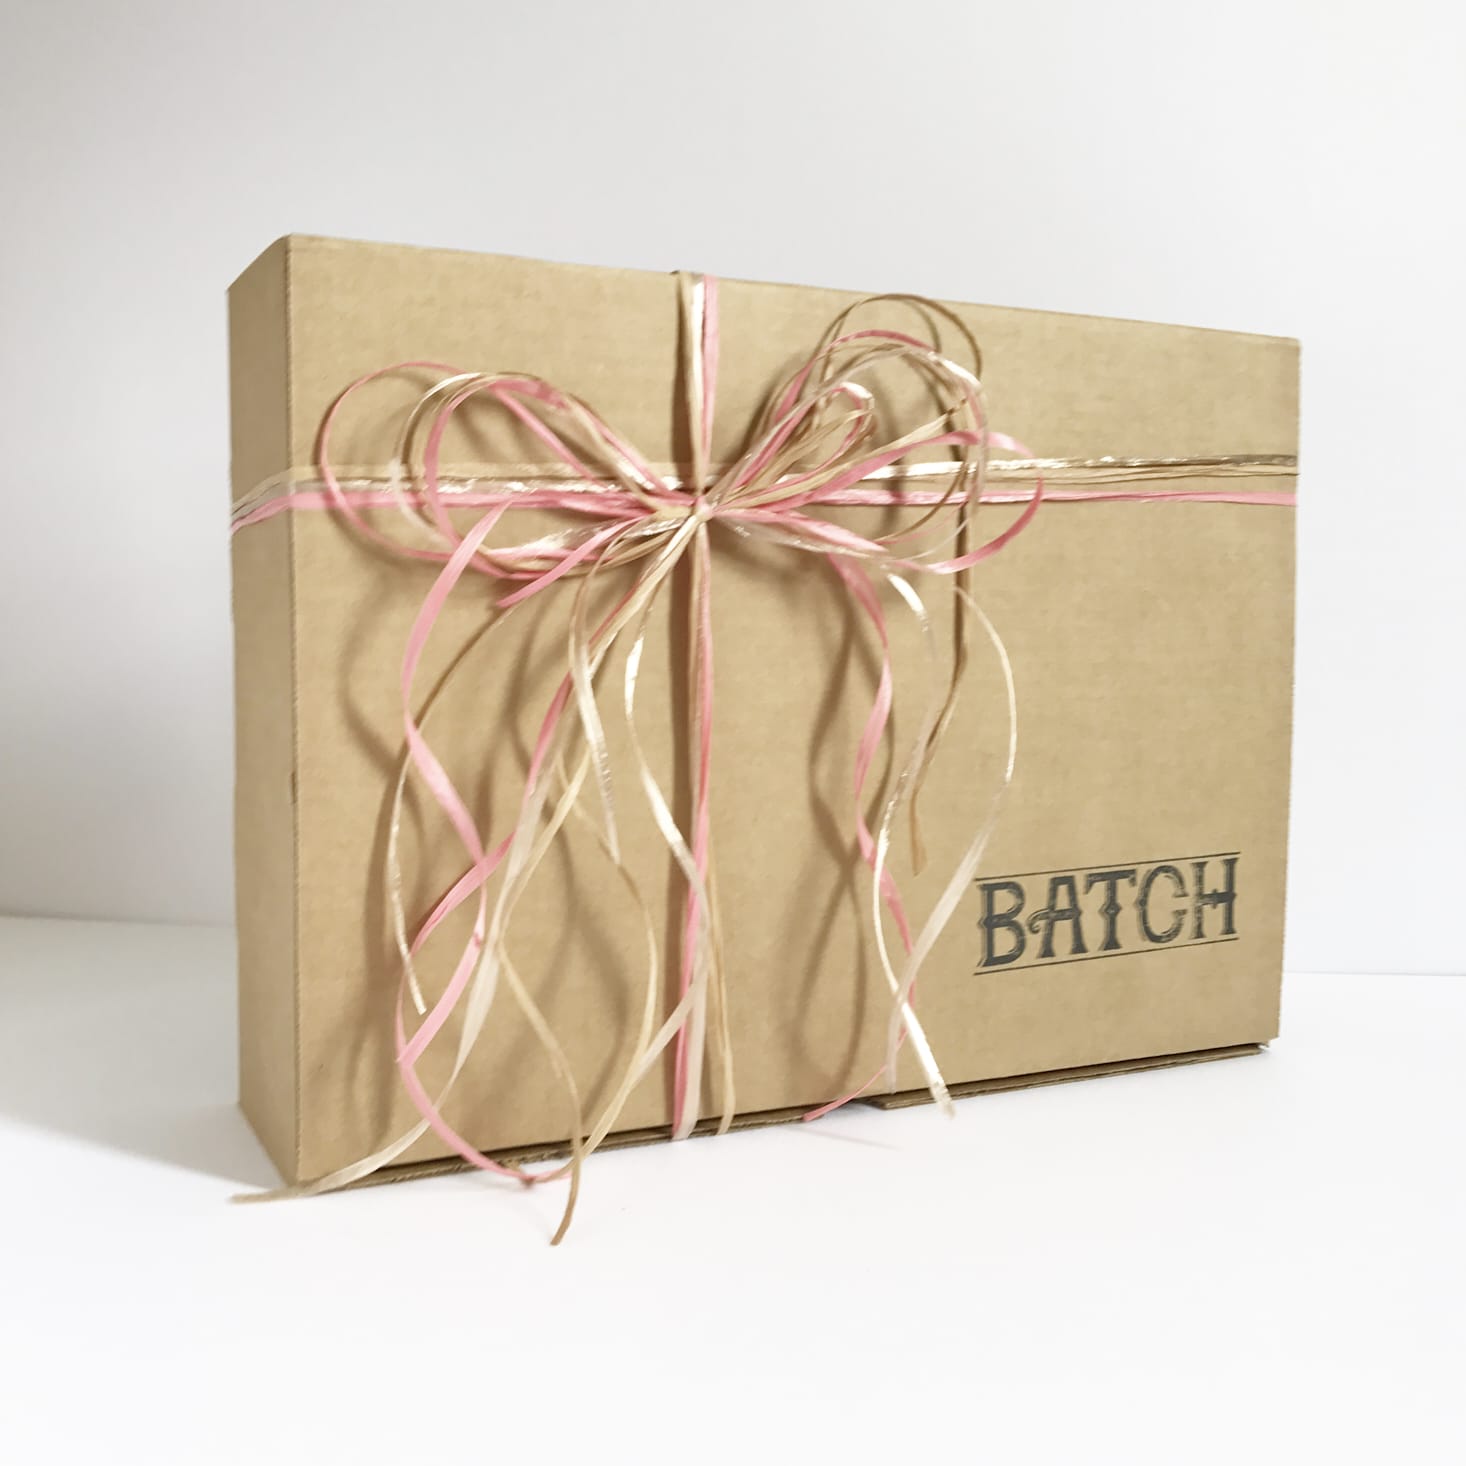 Batch Women’s Deluxe Subscription Discovery Box Review + Coupon – May 2017